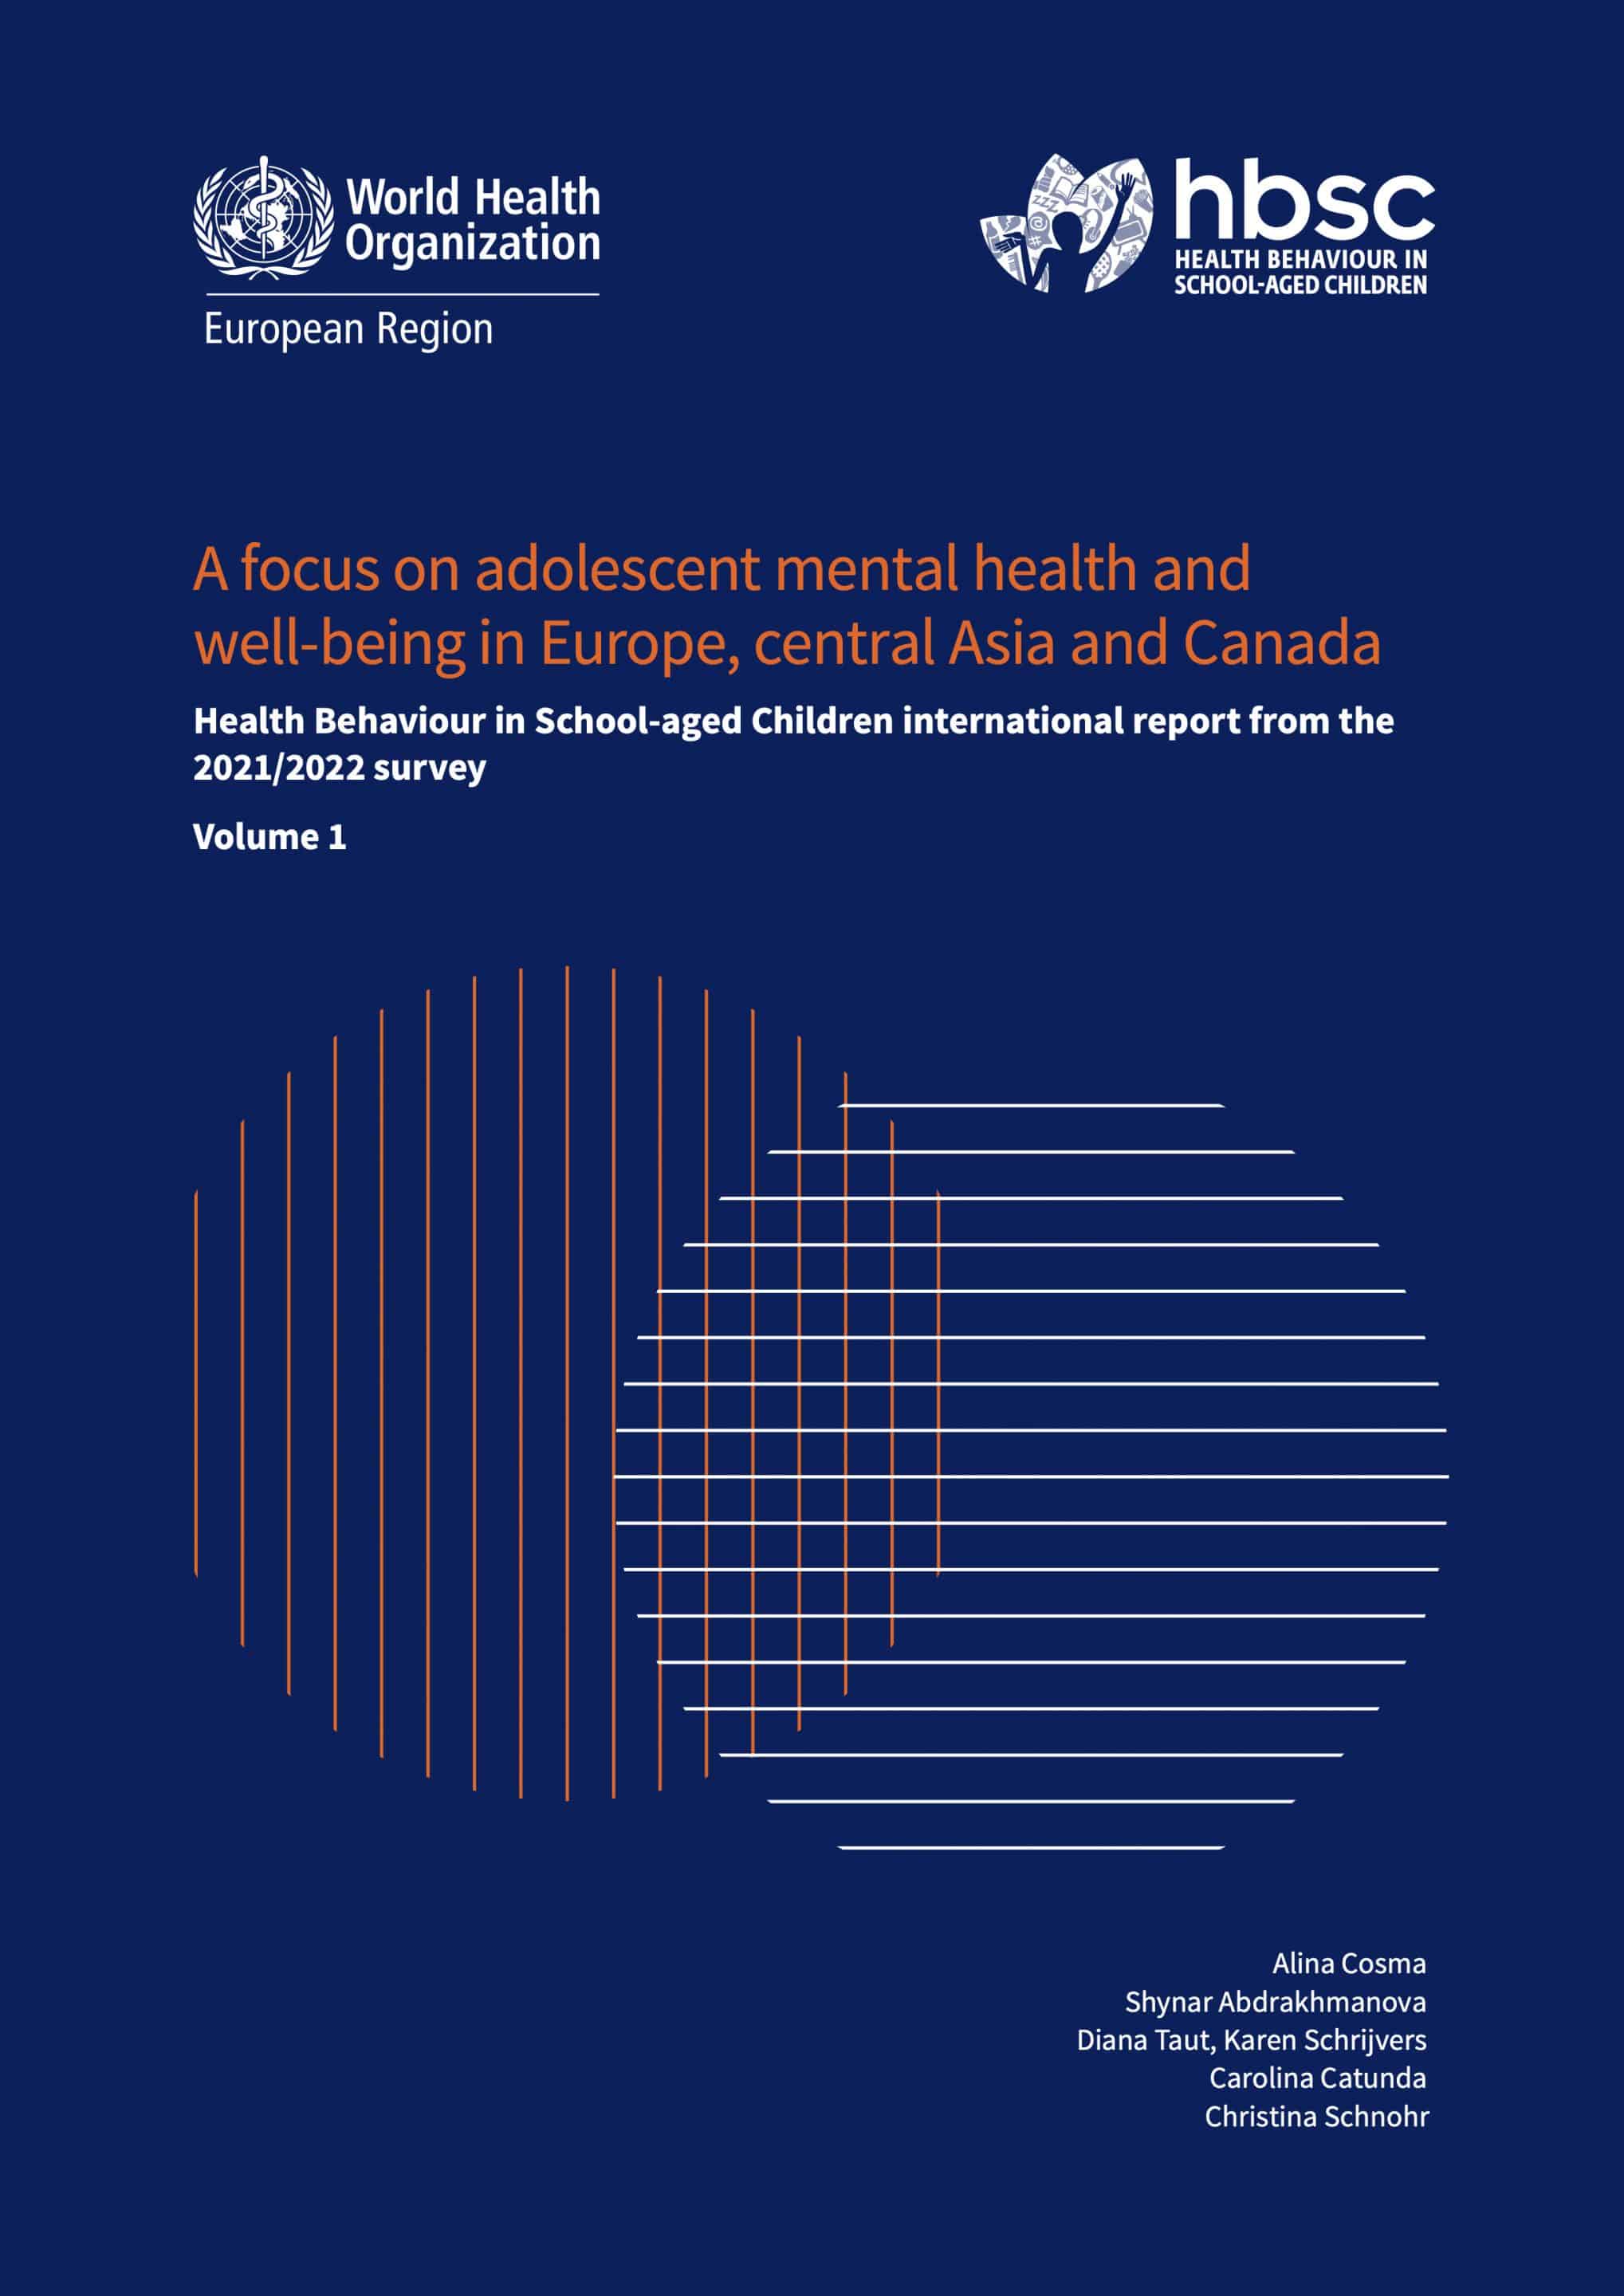 Front cover of the first volume of the HBSC study international report from the 2021/22 survey